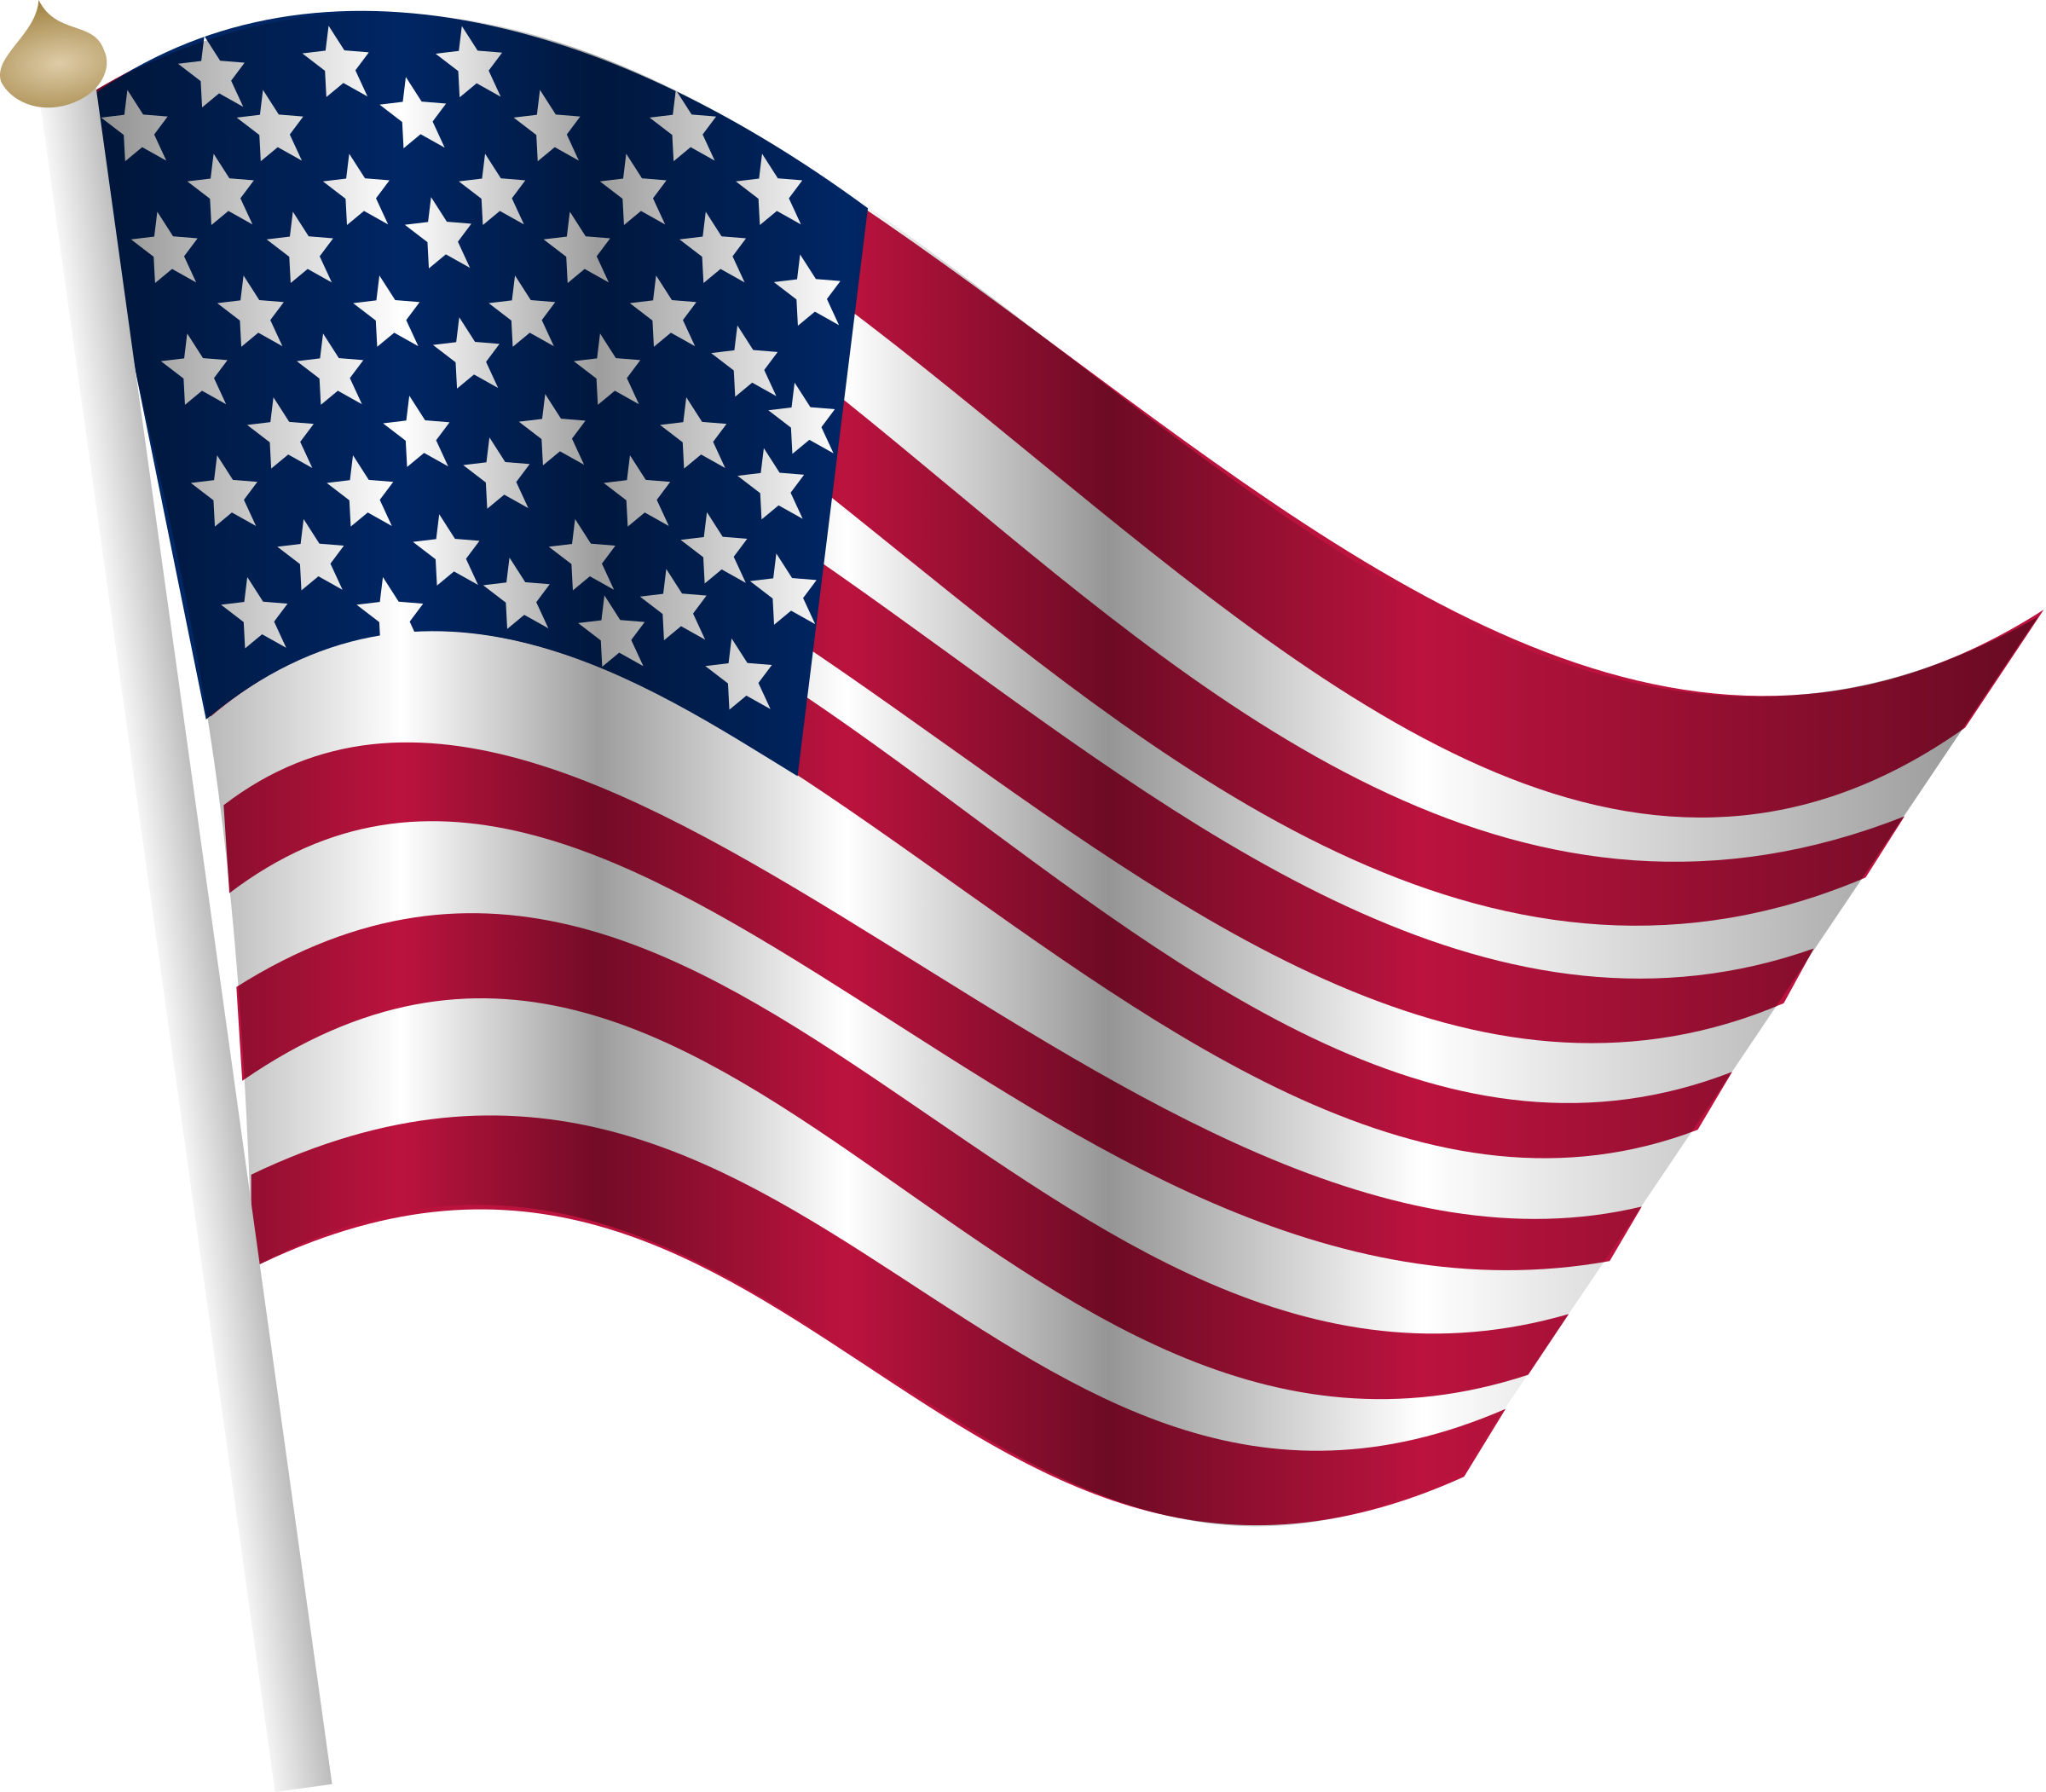 Flag of the United States Clip art.